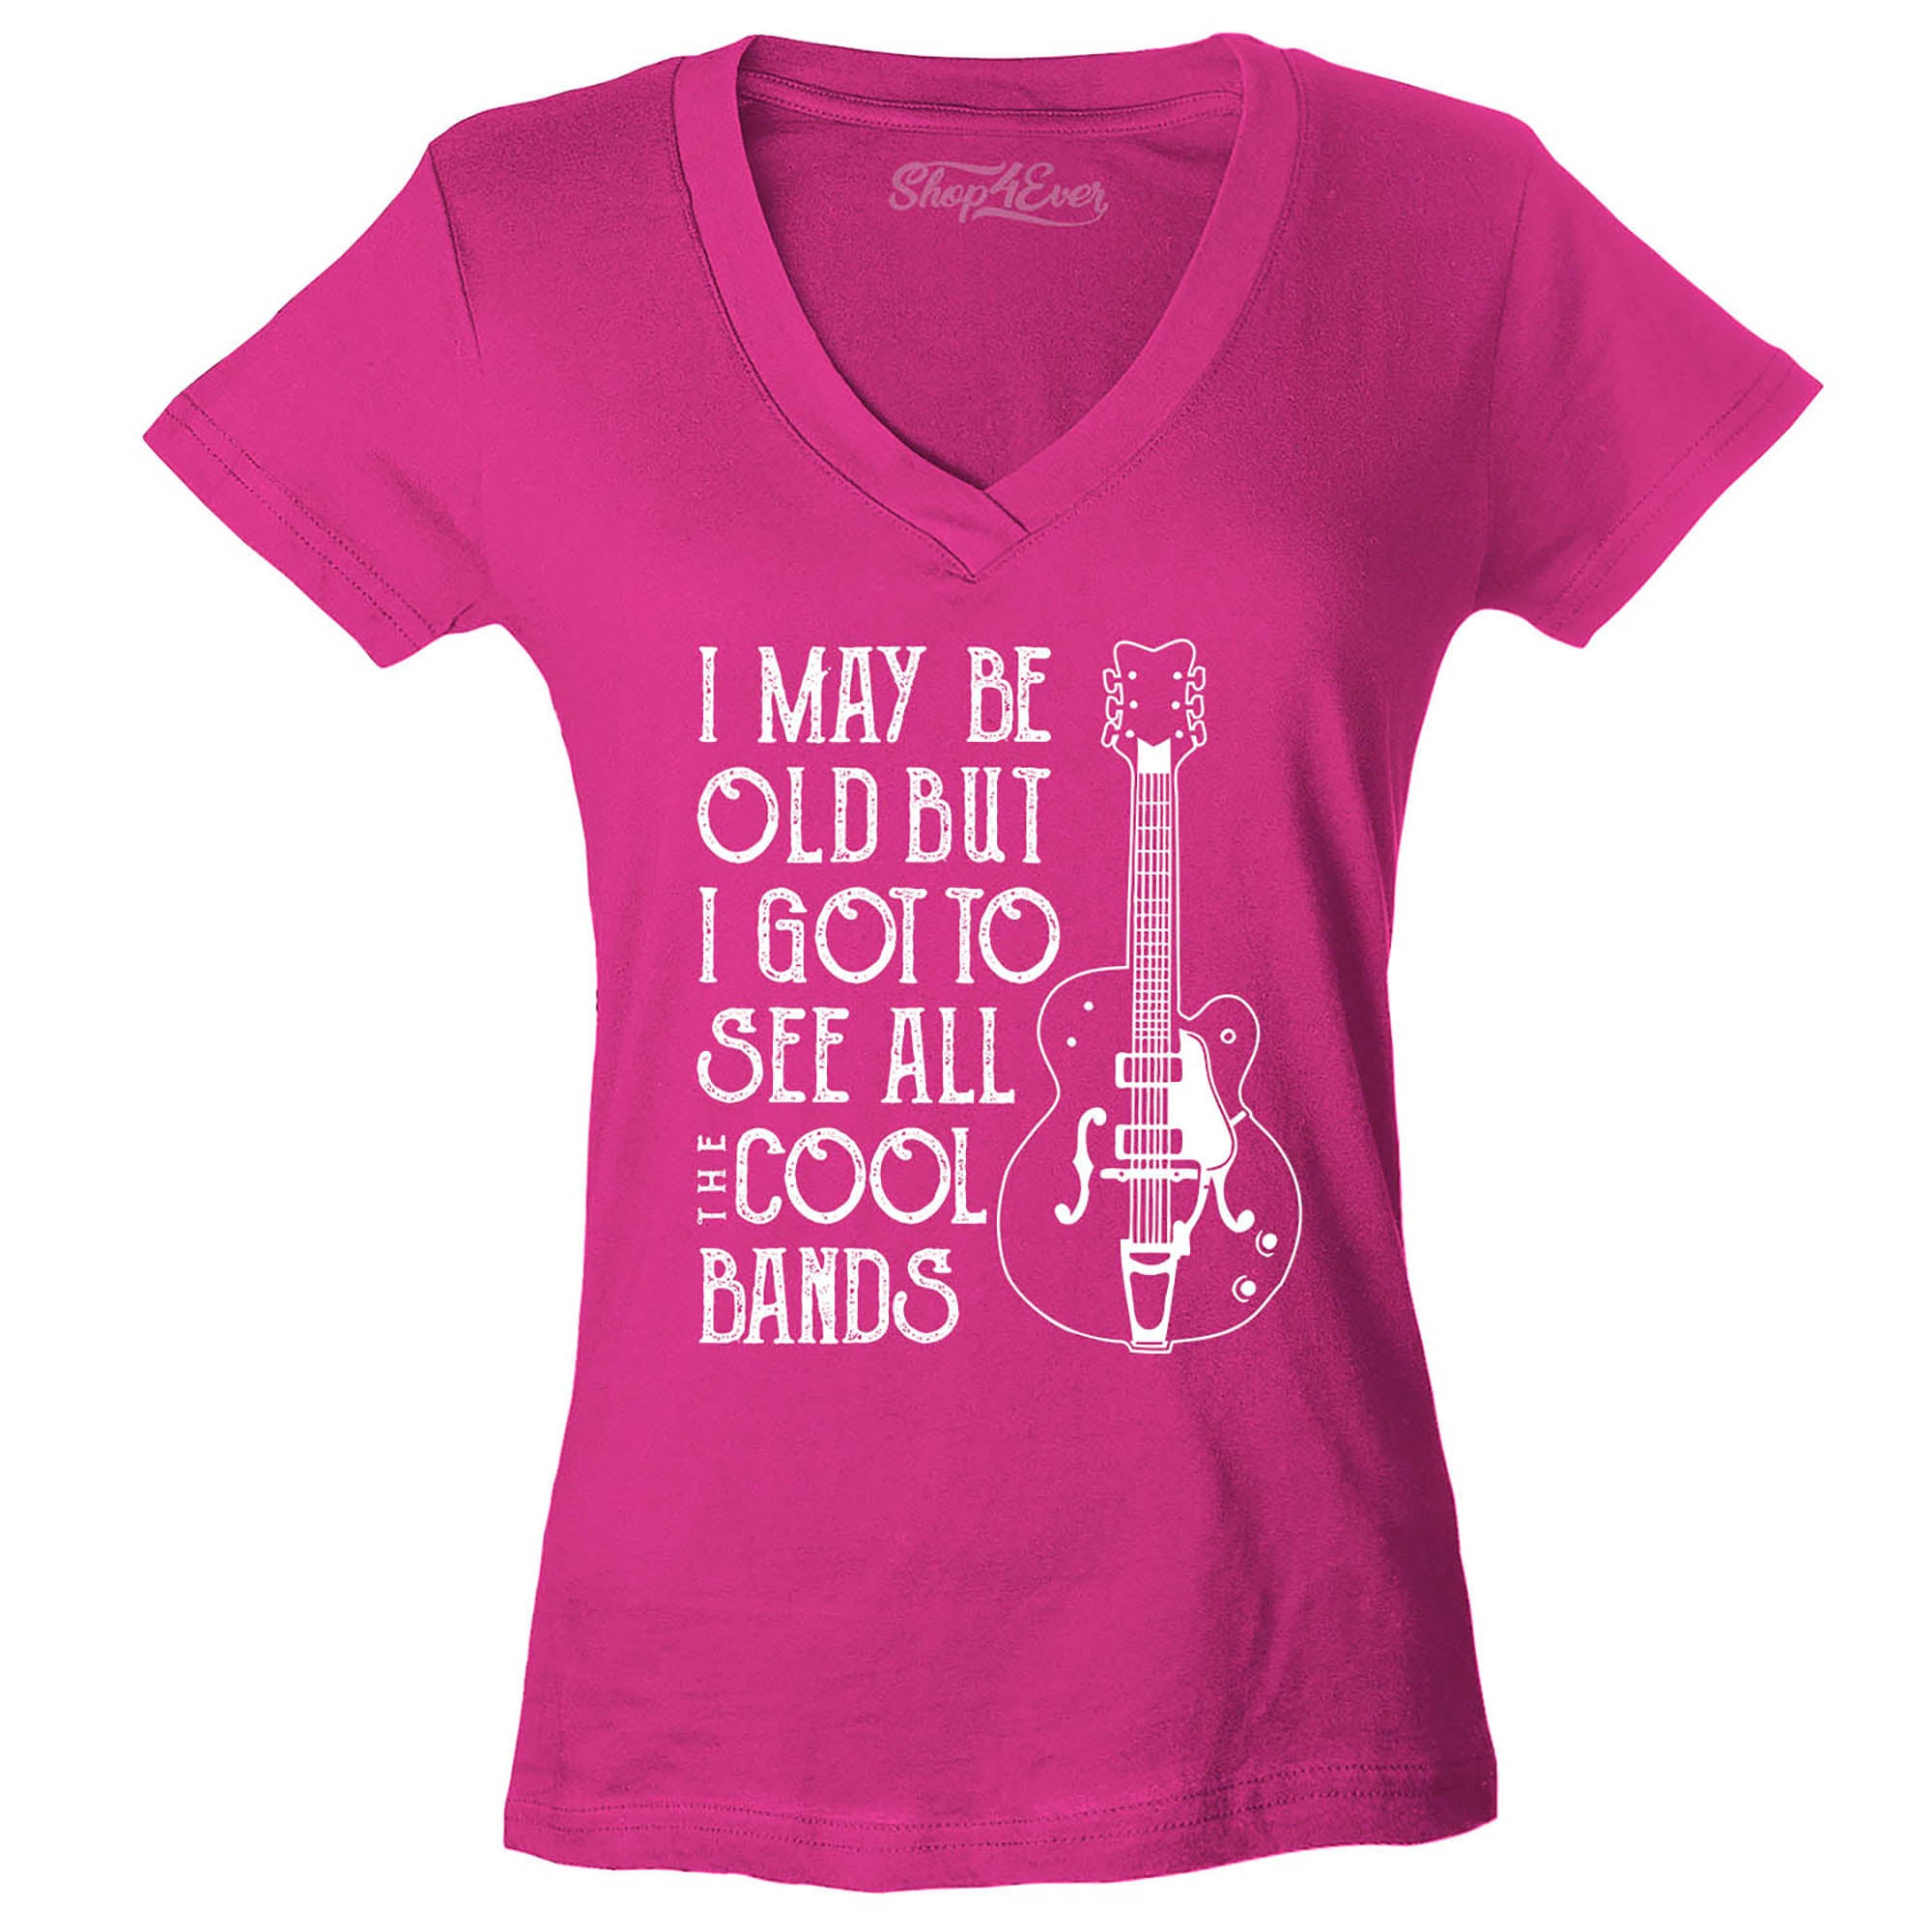 I May be Old but I Got to See All The Cool Bands Women's V-Neck T-Shirt Slim Fit